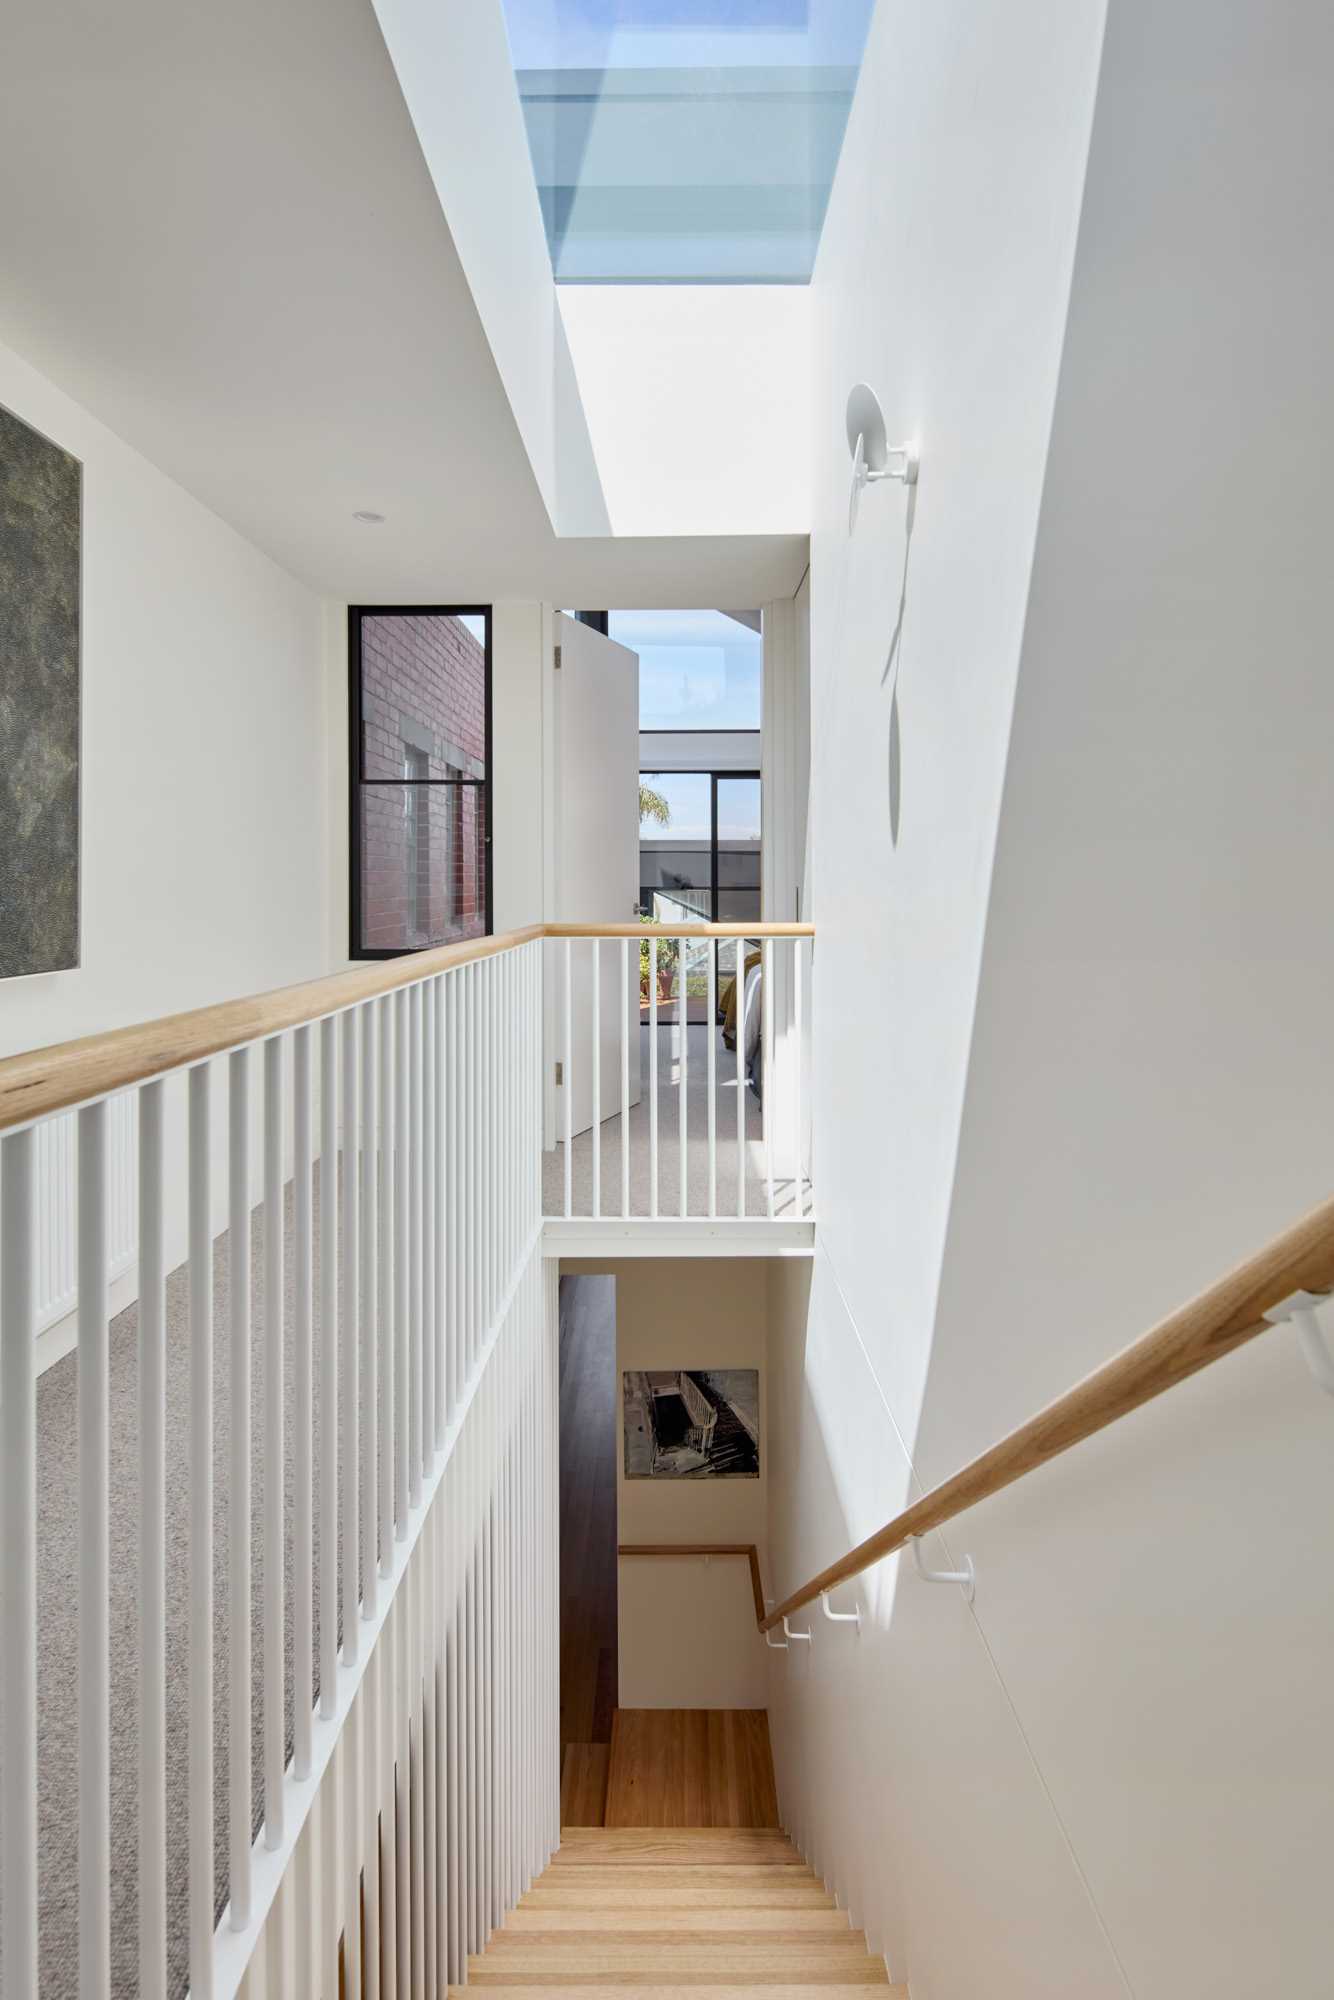 A modern white and wood staircase.